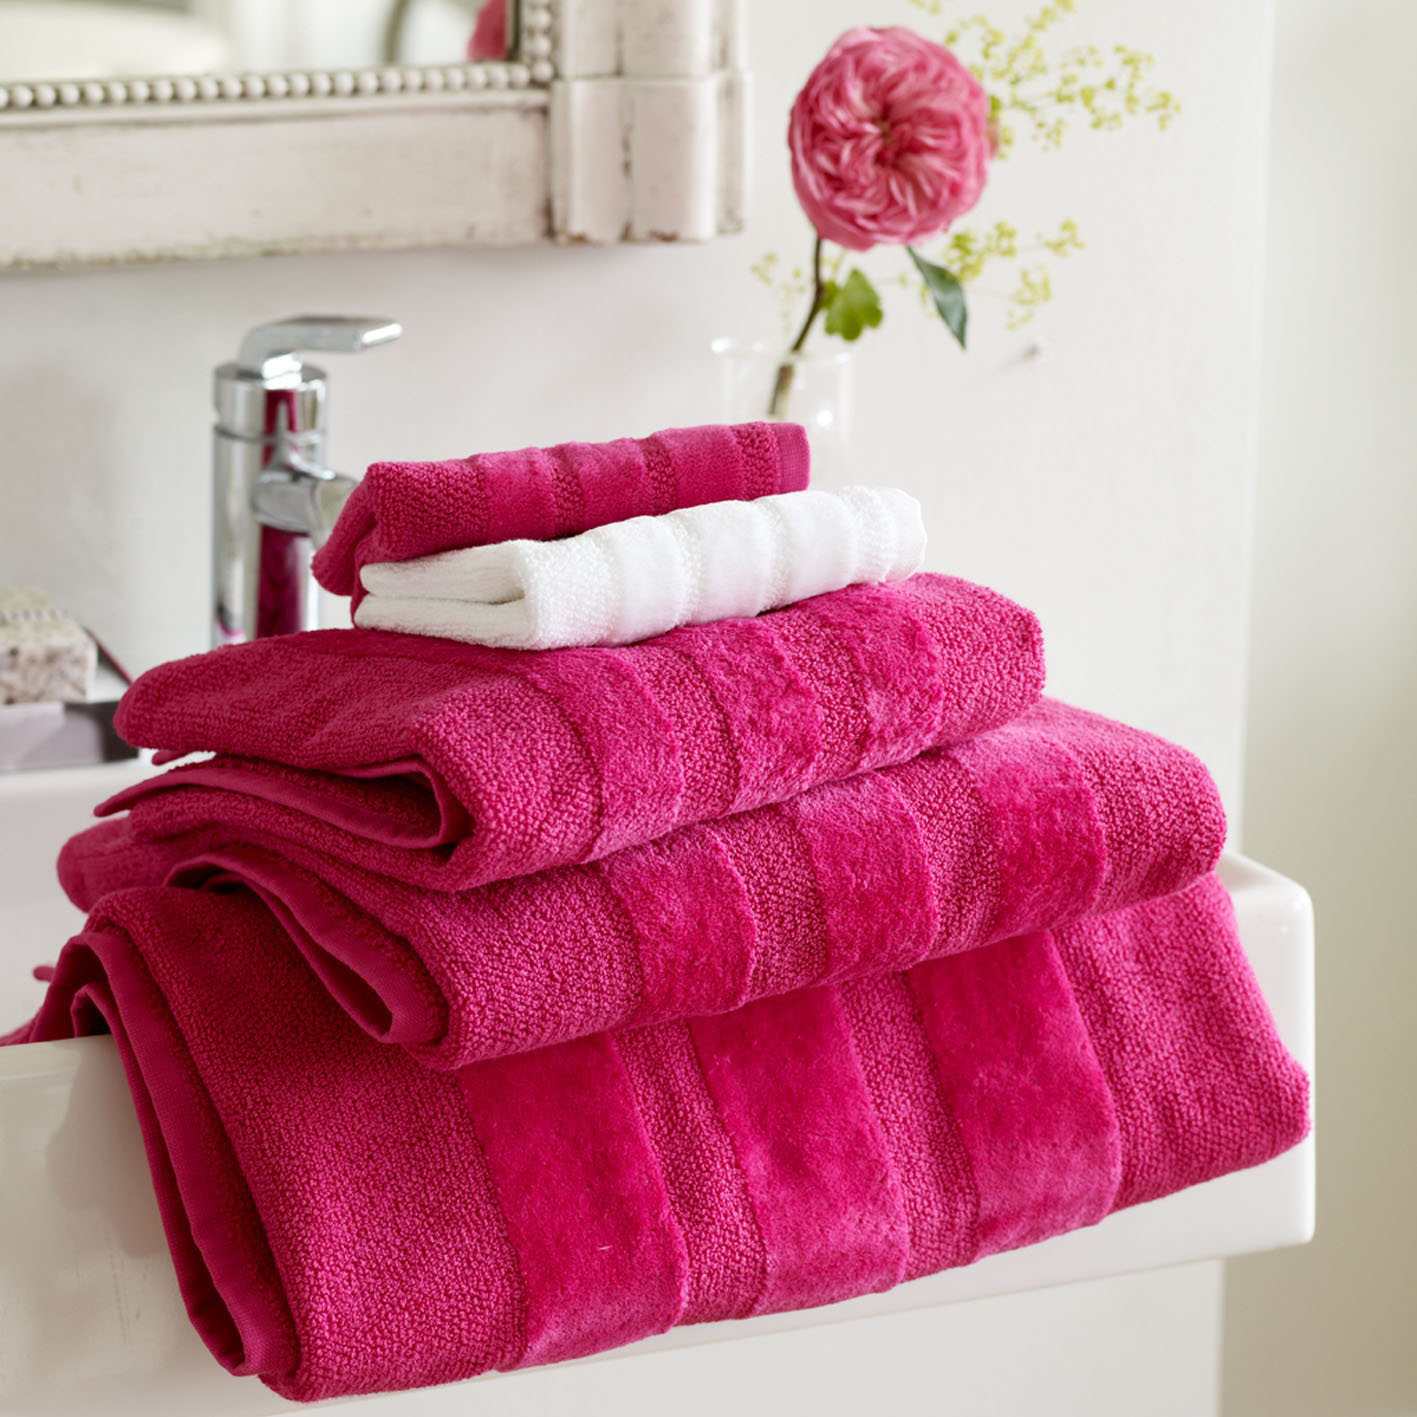 Hard Goods Towels and Robes Buying Agency in Gurgaon